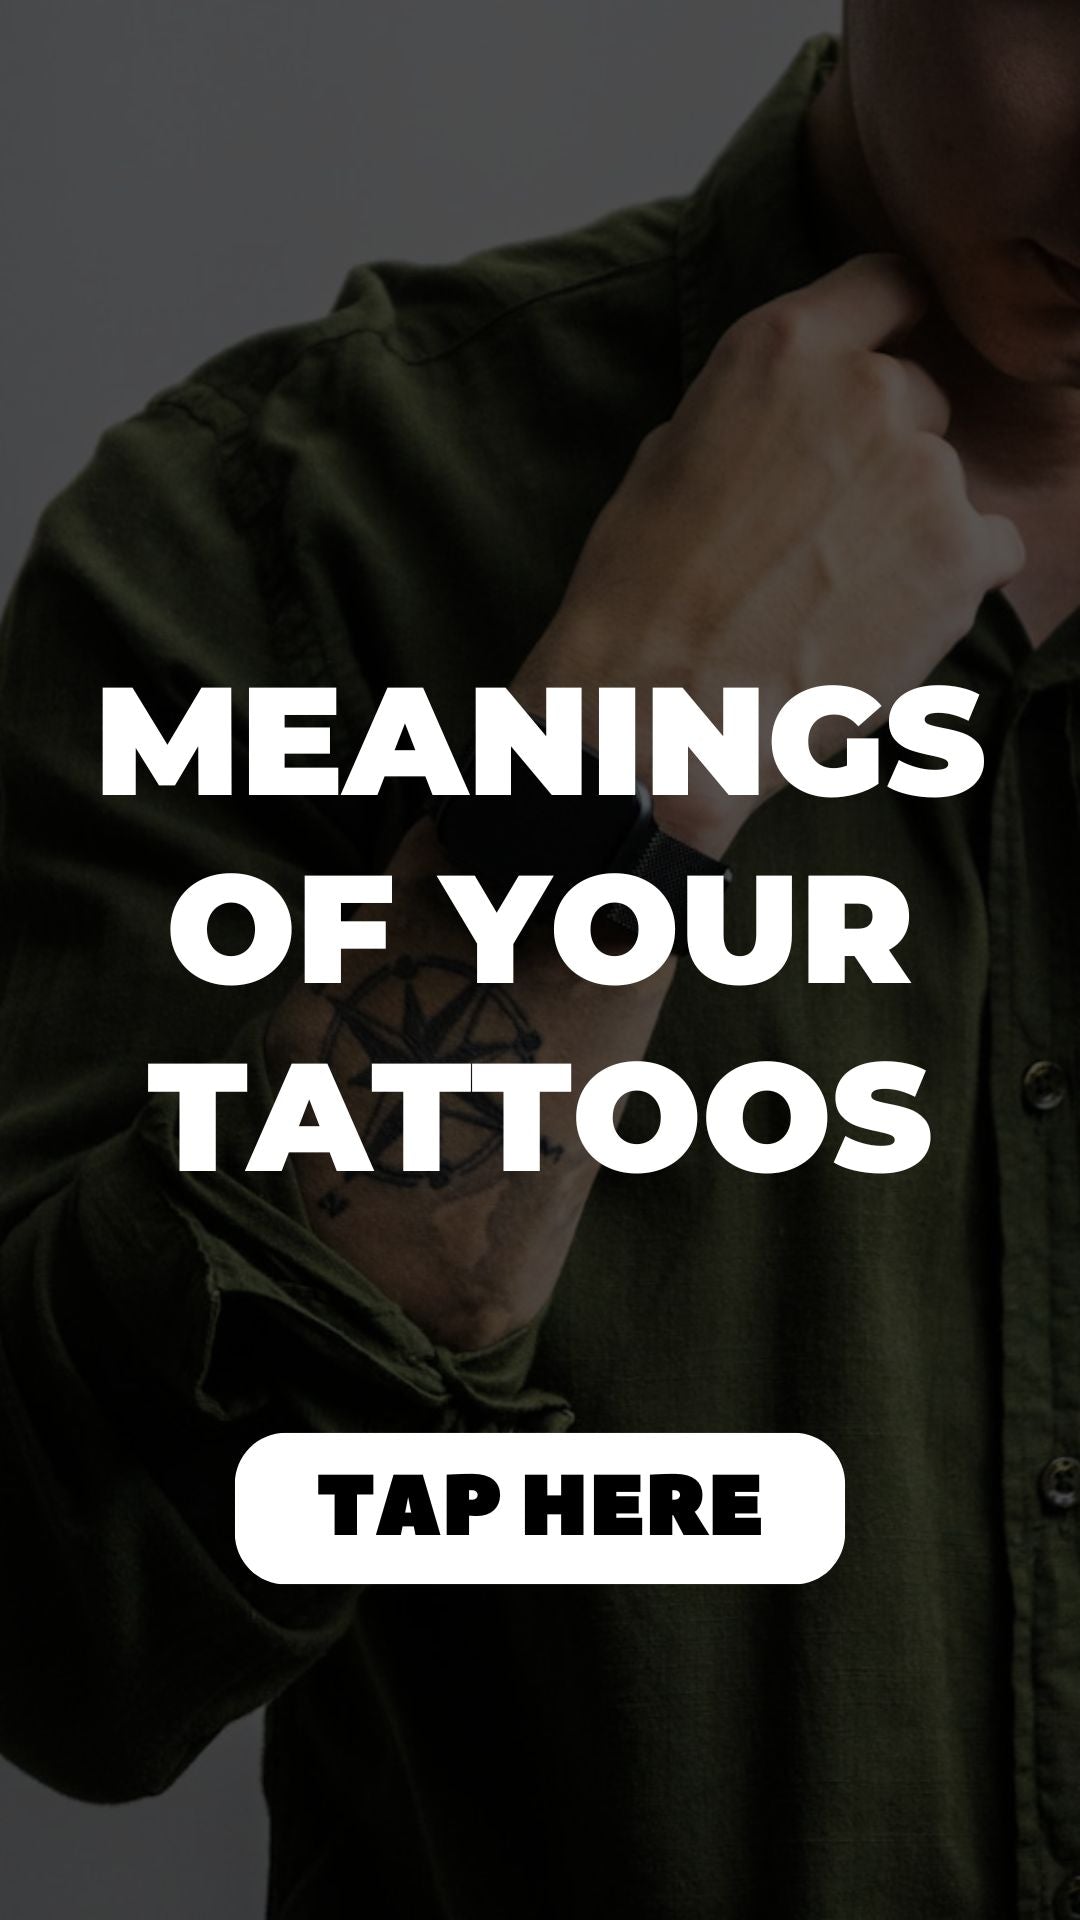 Meanings of tattoos